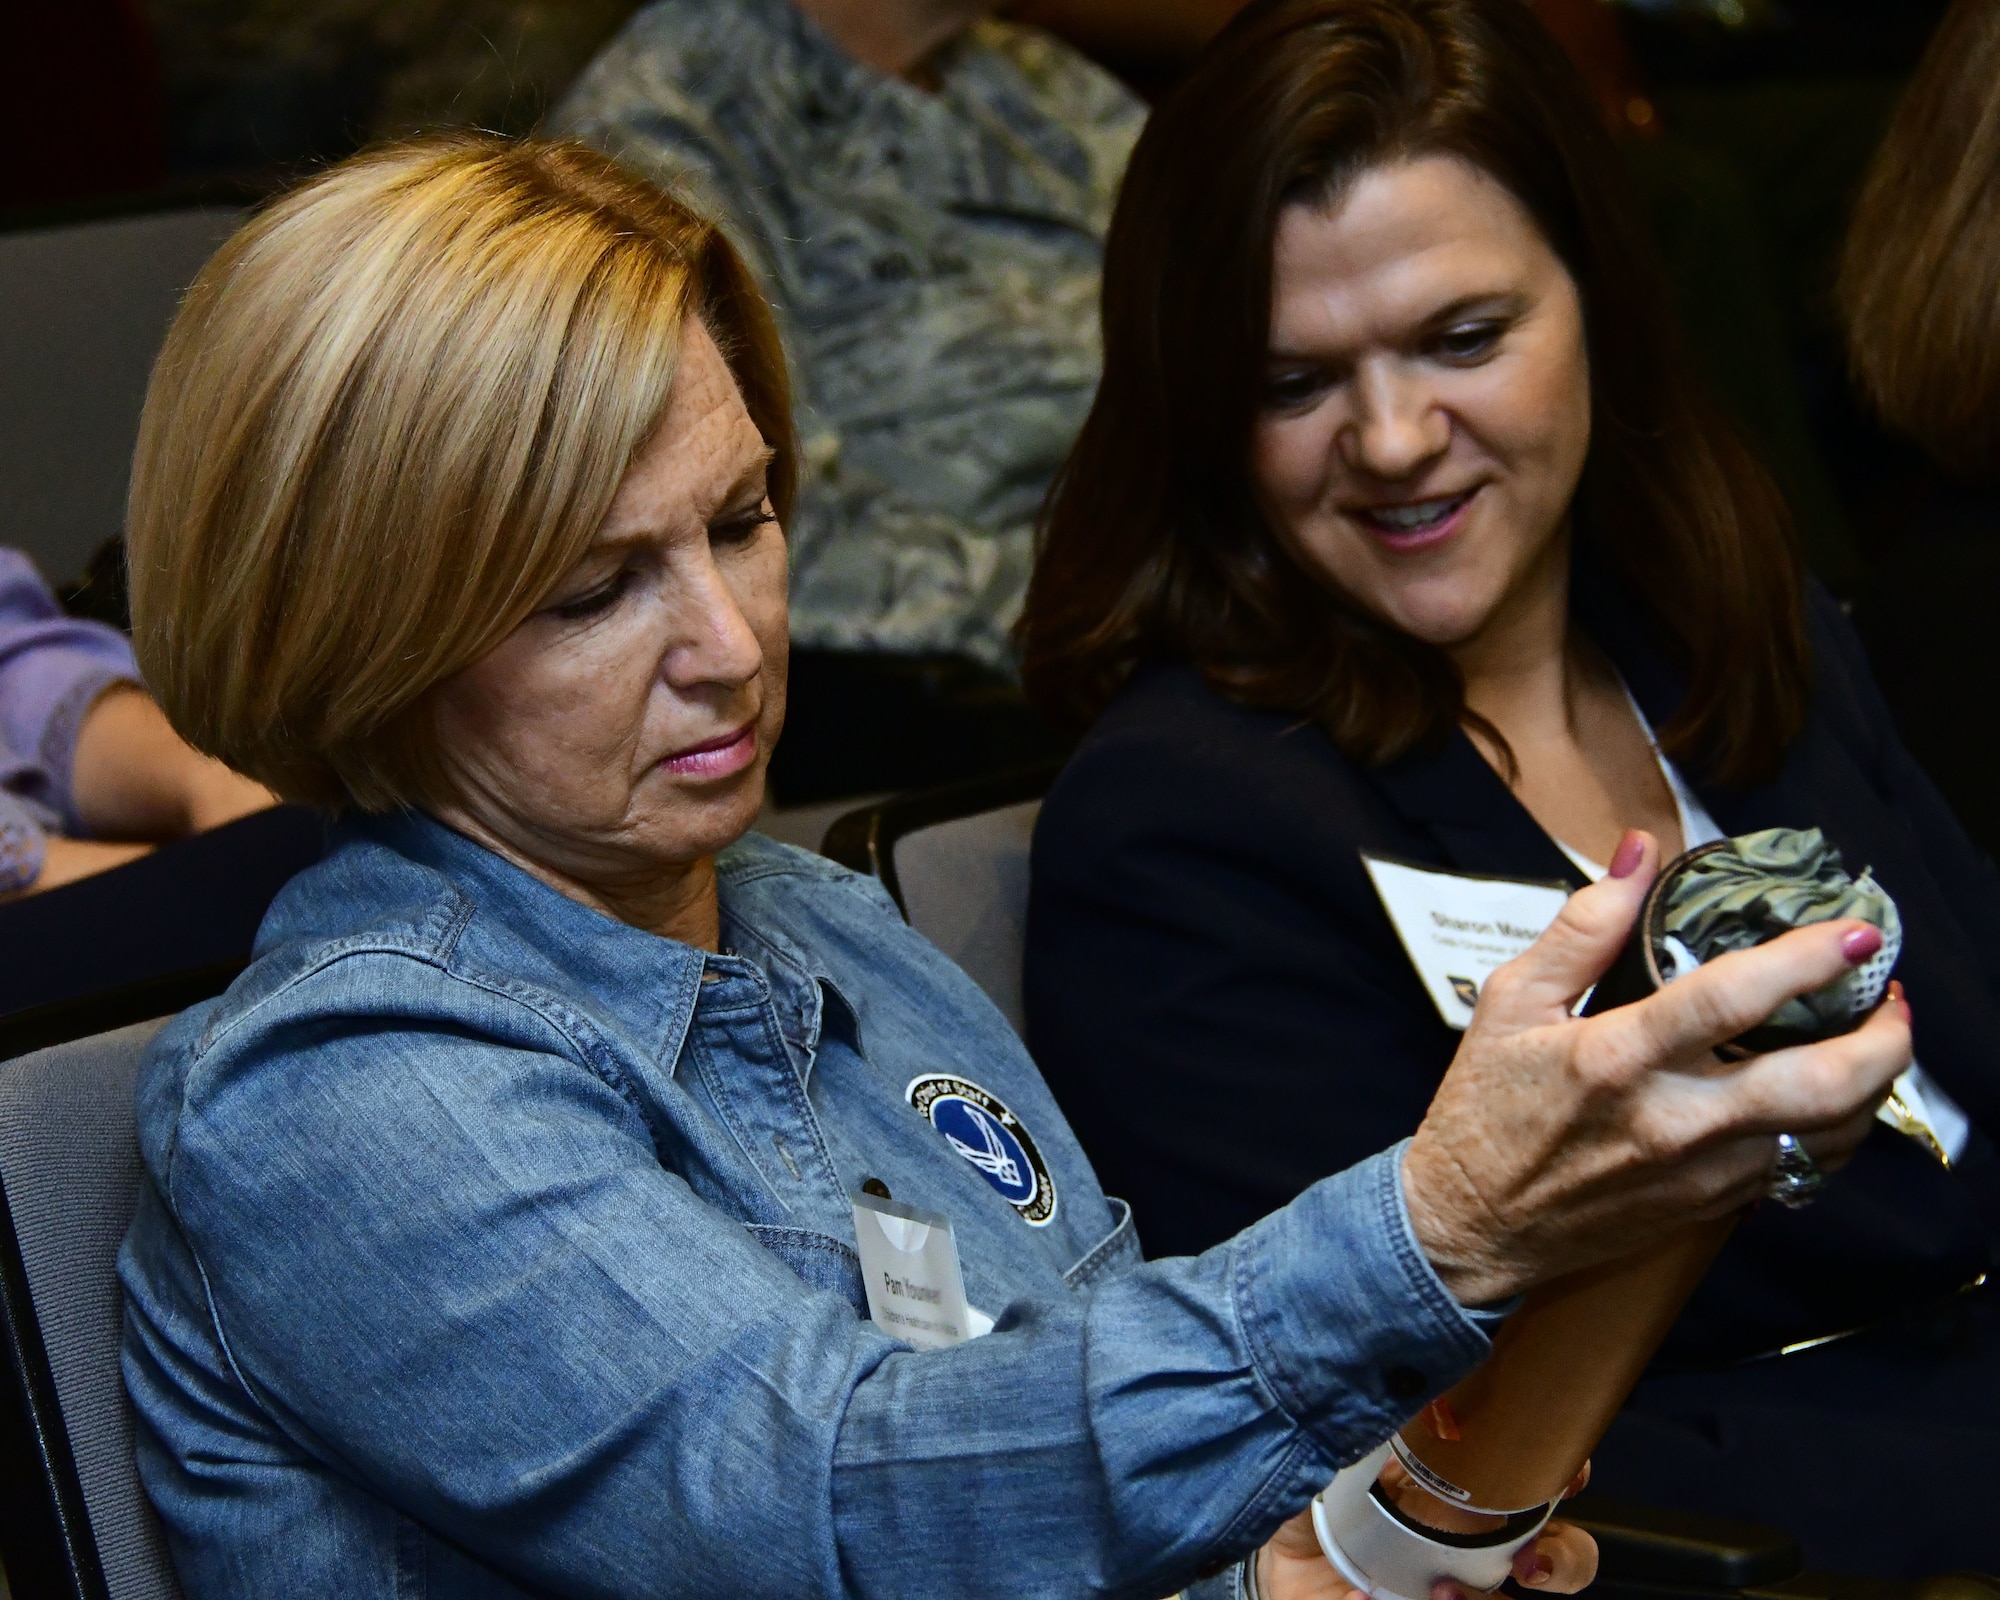 Pam Younker, left, and Sharon Mason, both civic leaders from Georgia, look at a dropsonde during a mission brief on the Air Force Reserve Hurricane Hunters as part of the 22nd Air Force Senior Leader Summit held in August 2018. Dropsondes are dropped from specially equipped C-130s during weather reconnaissance missions to measure storm conditions. (U.S. Air Force photo/Staff Sgt. Andrew Park)